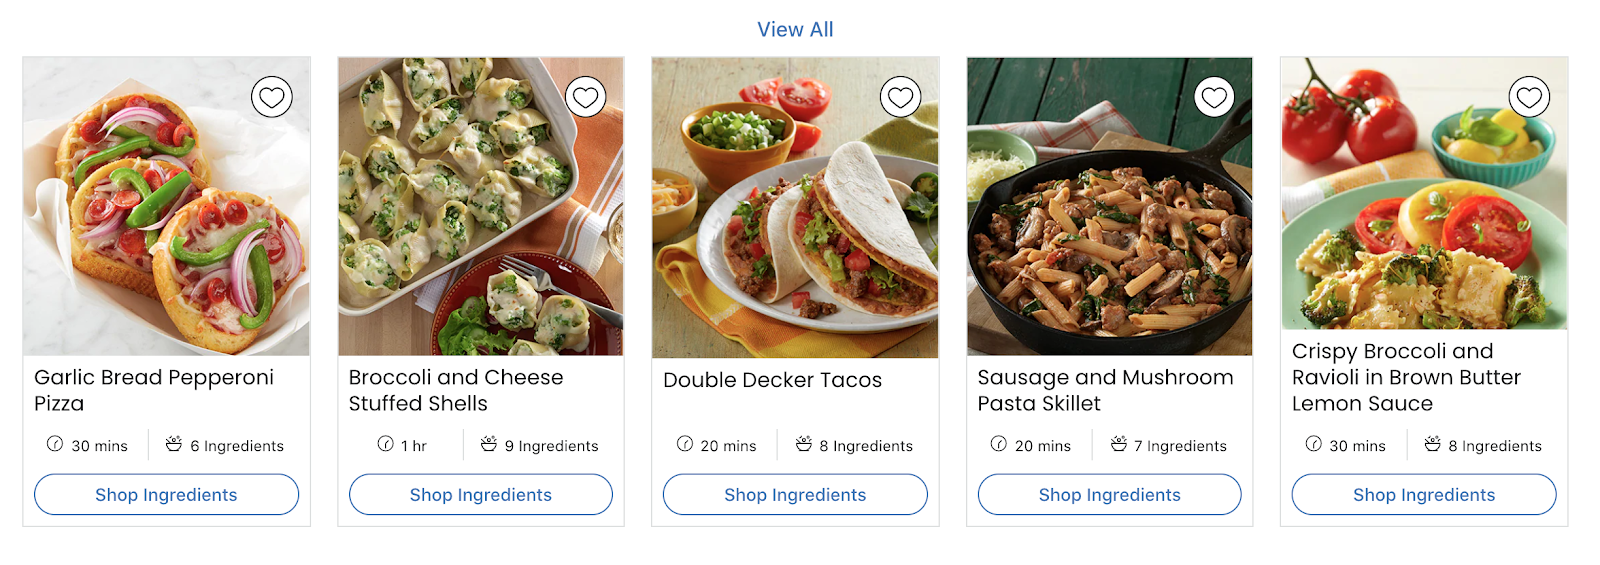 Krogers omnichannel experience offers a website with delicious recipes